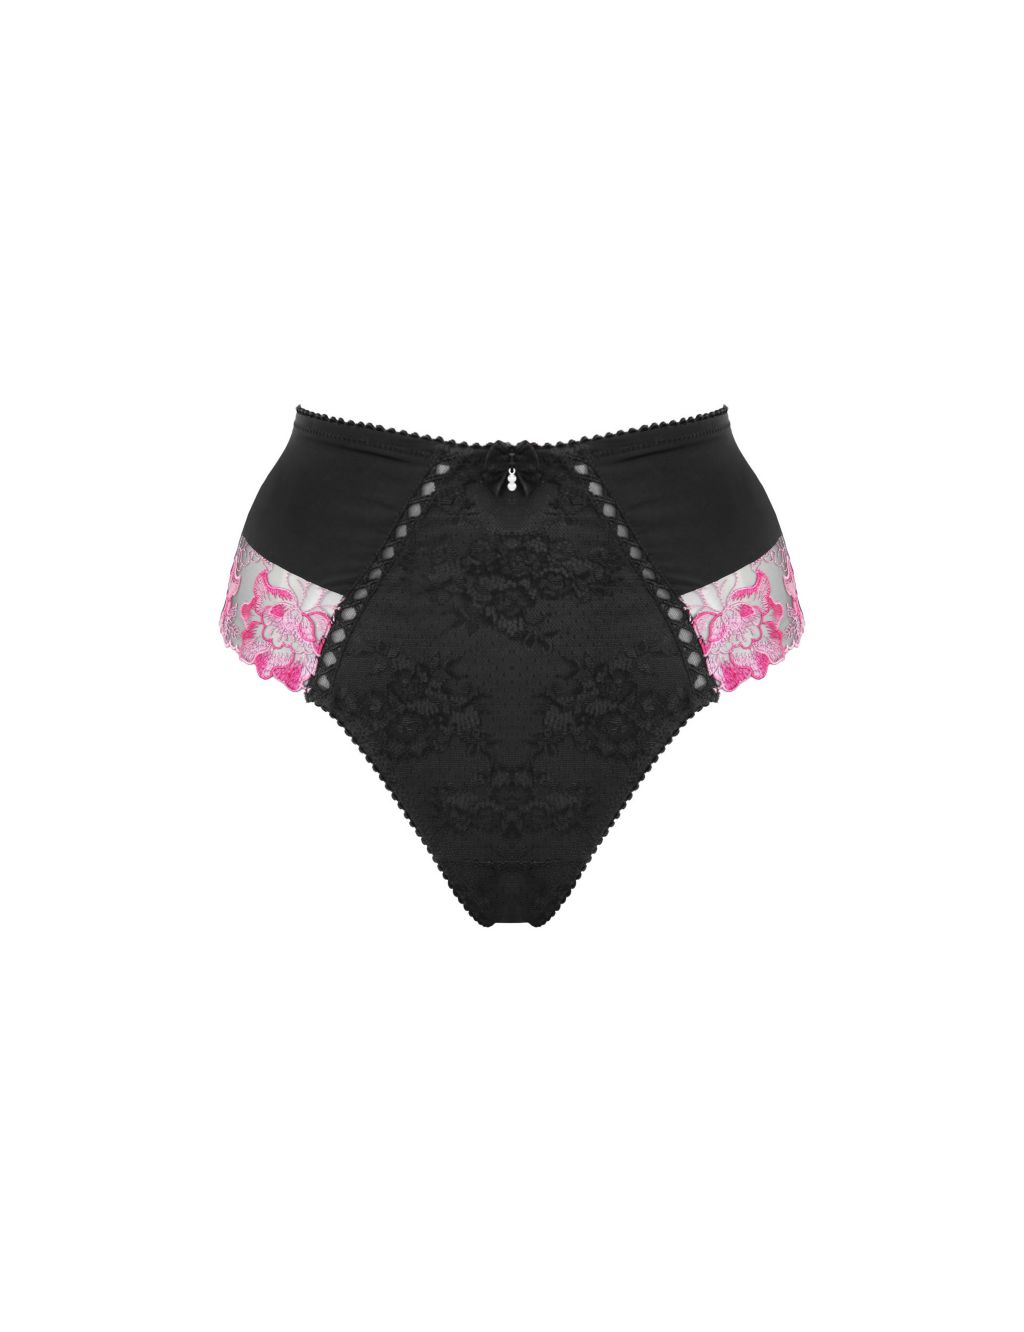 Sofia Lace Embroidered Full Briefs 1 of 5